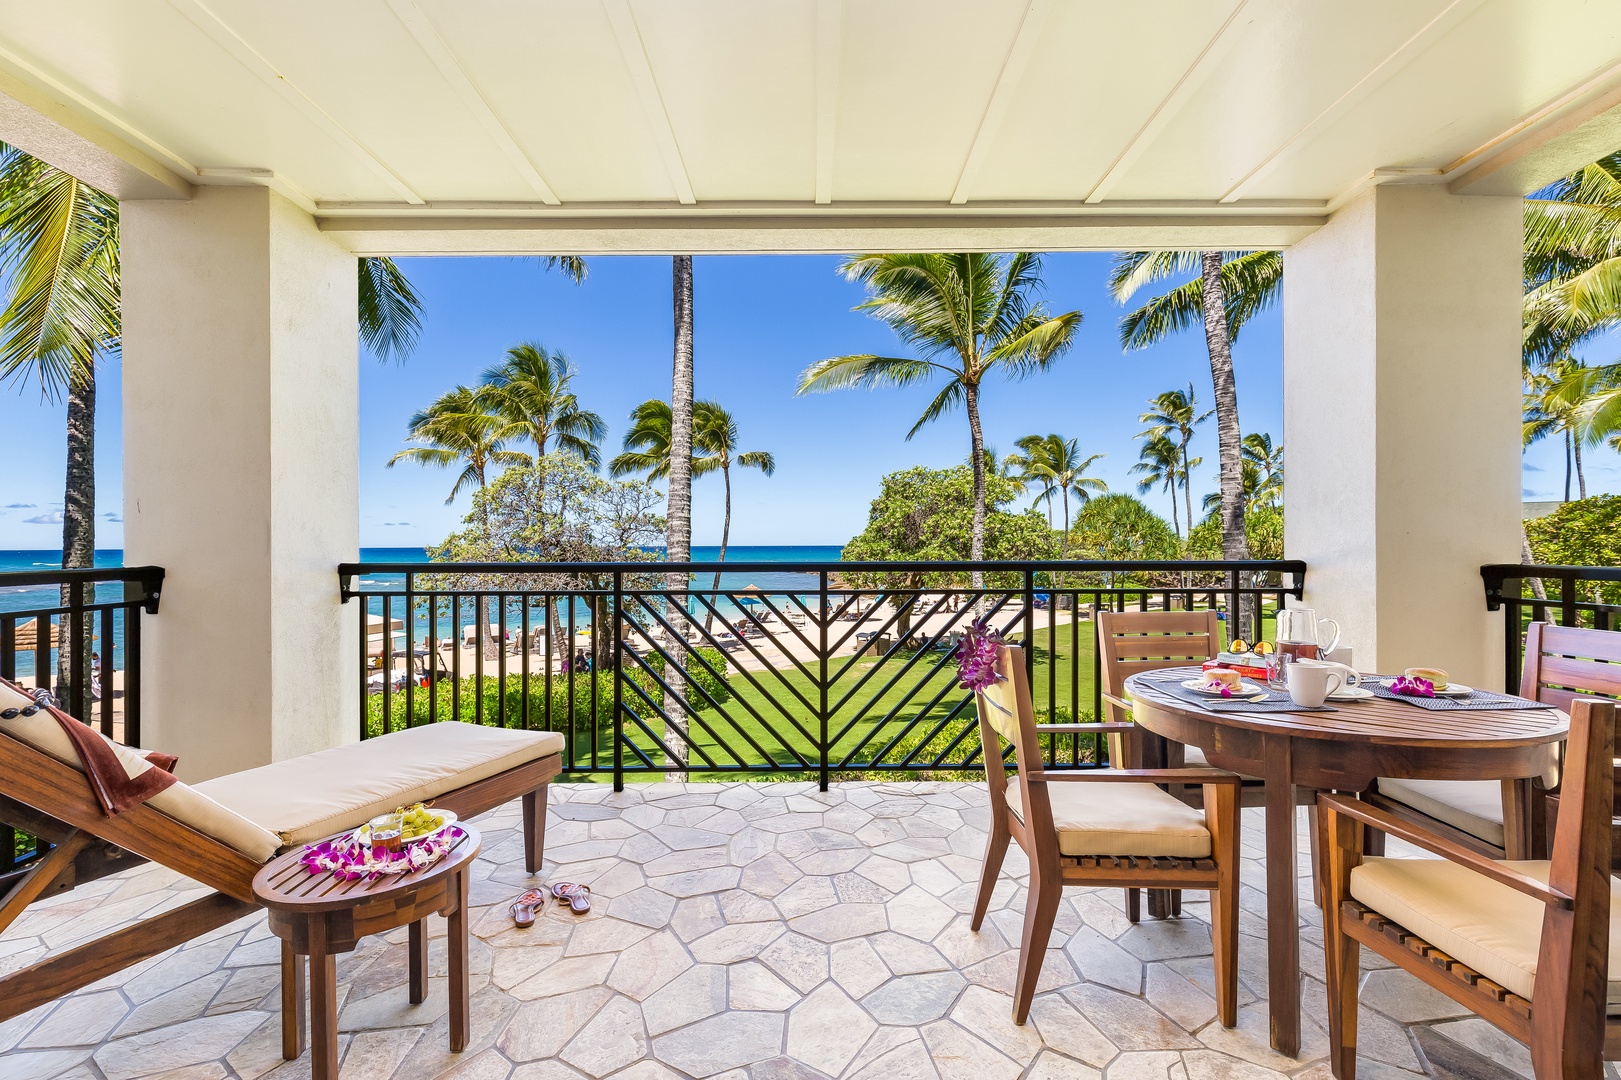 Kahuku Vacation Rentals, Turtle Bay Villas 201 - Prepare to be whisked away to a relaxing sanctuary once you step inside the primary suite